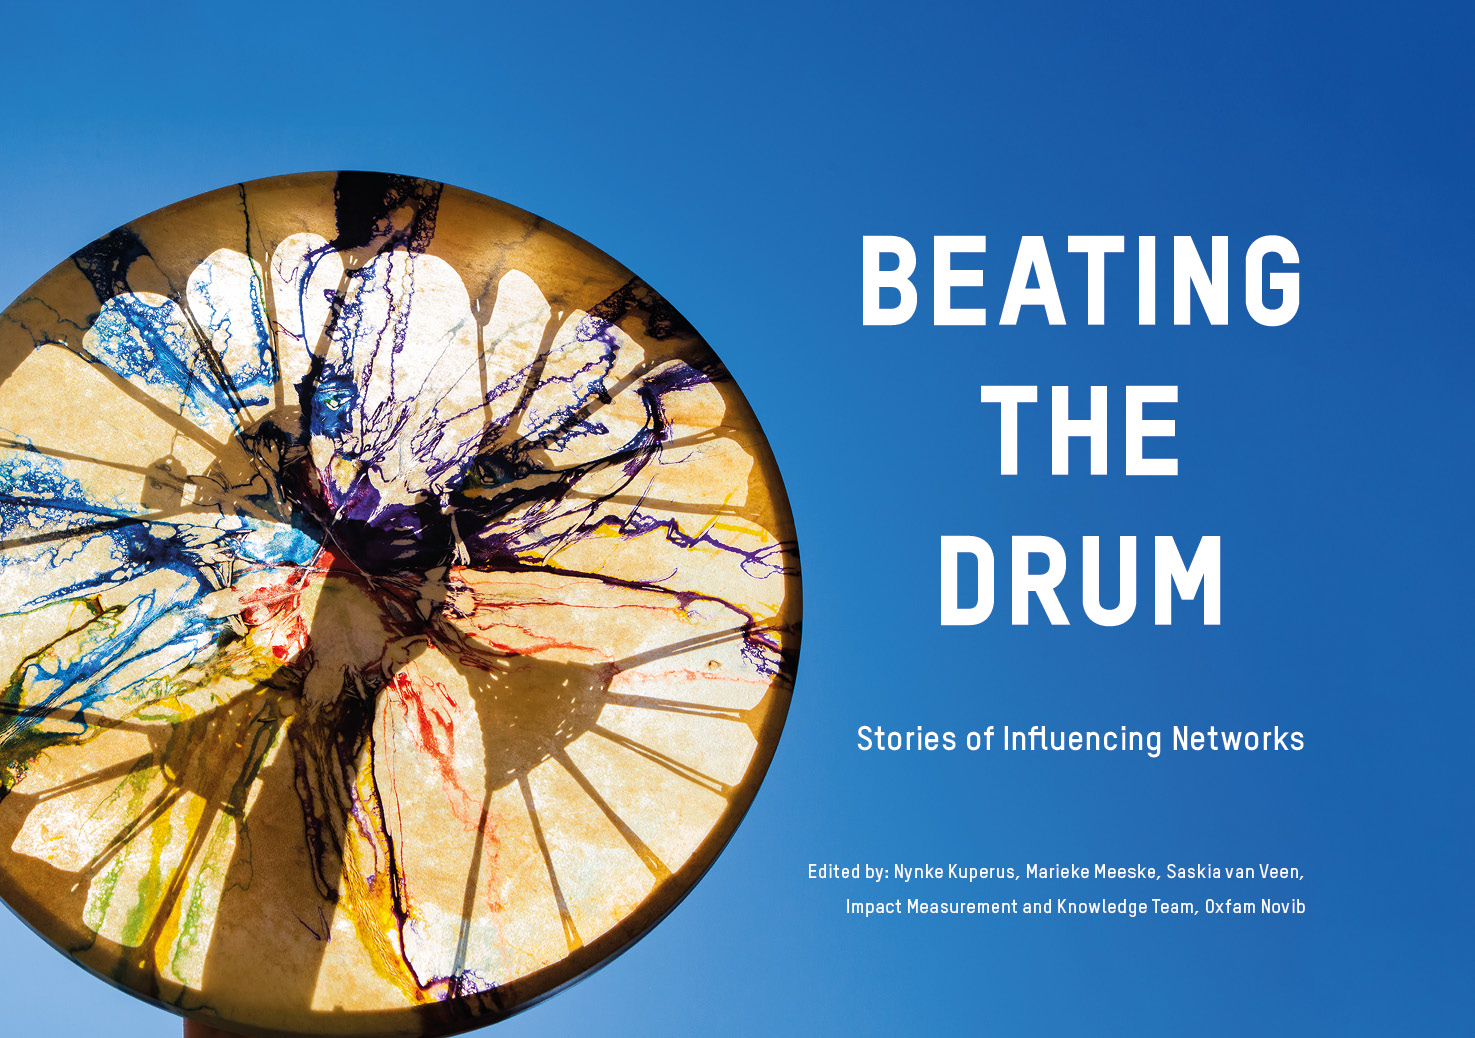 Beating the Drum: Stories of Influencing Networks